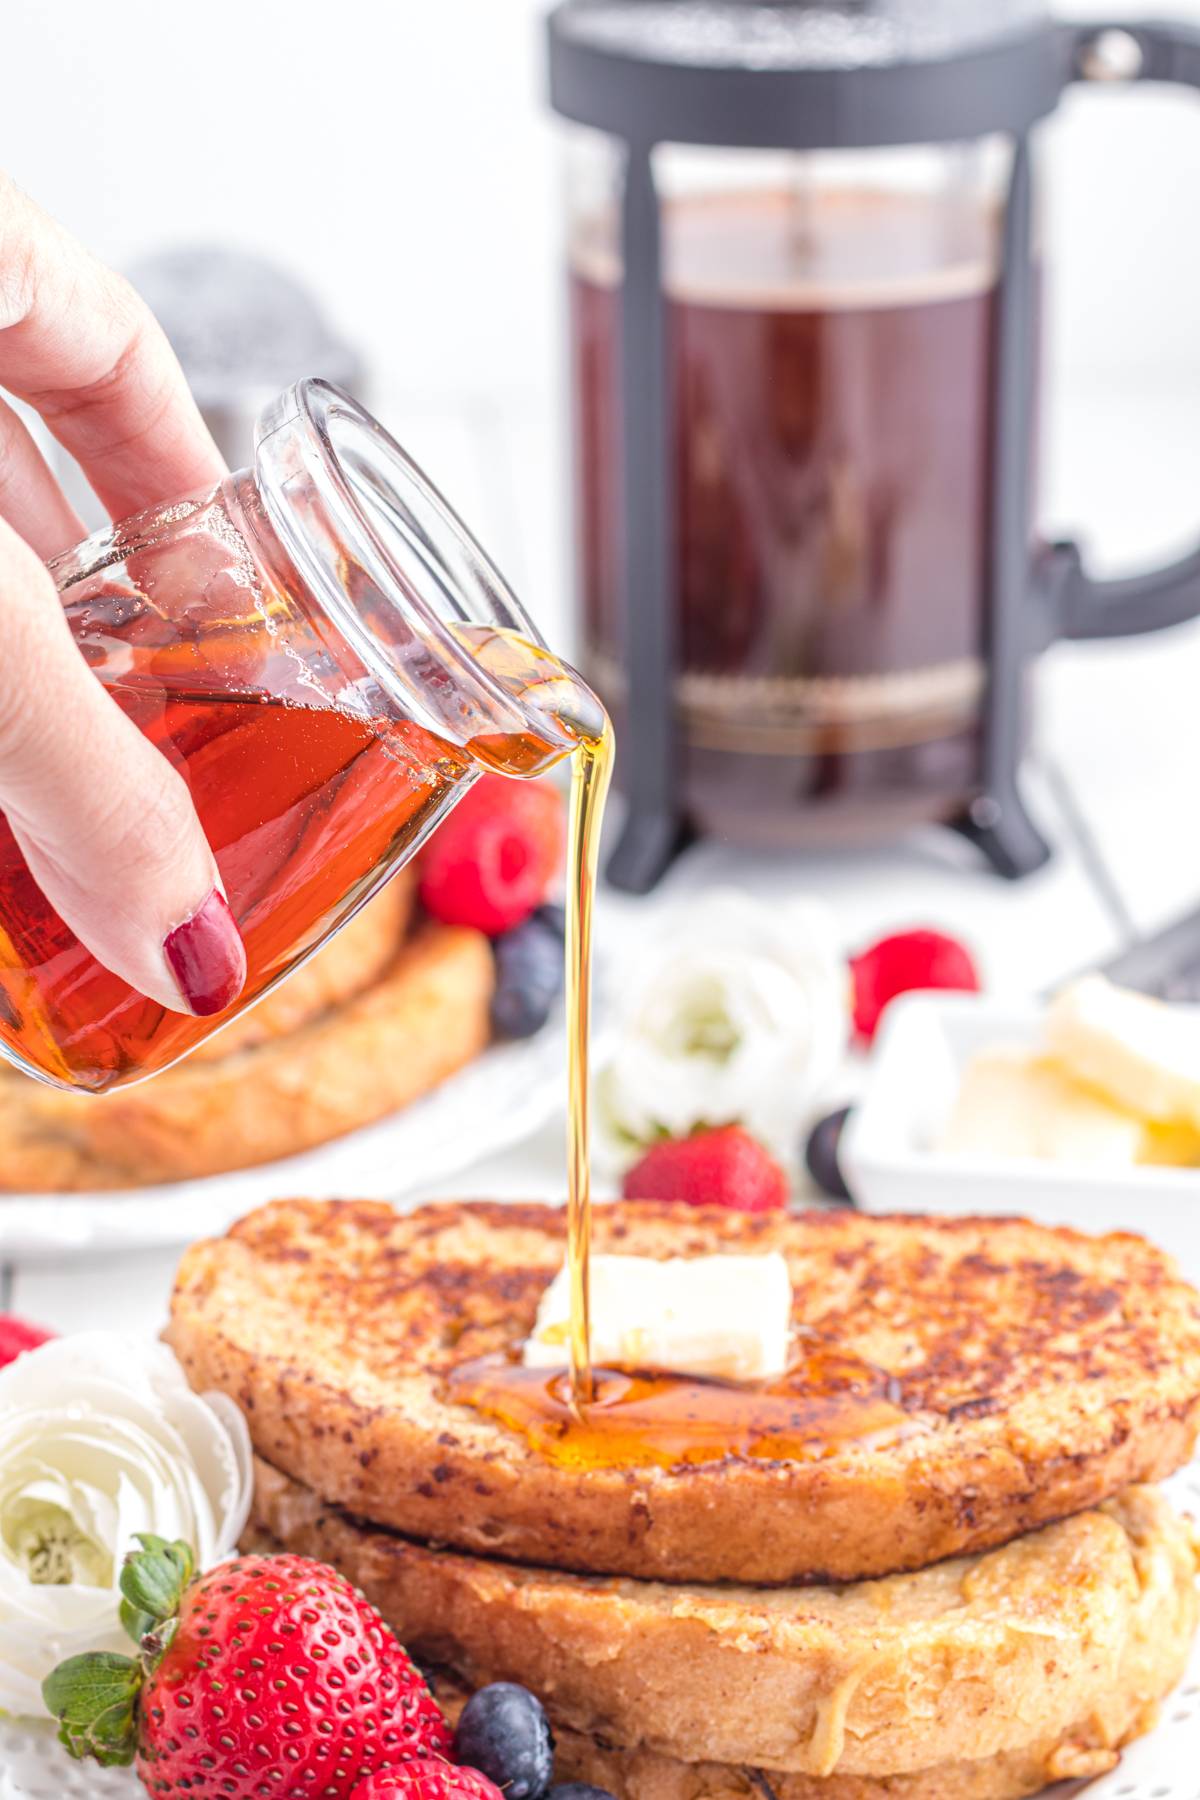 Maple syrup being poured onto French toast.